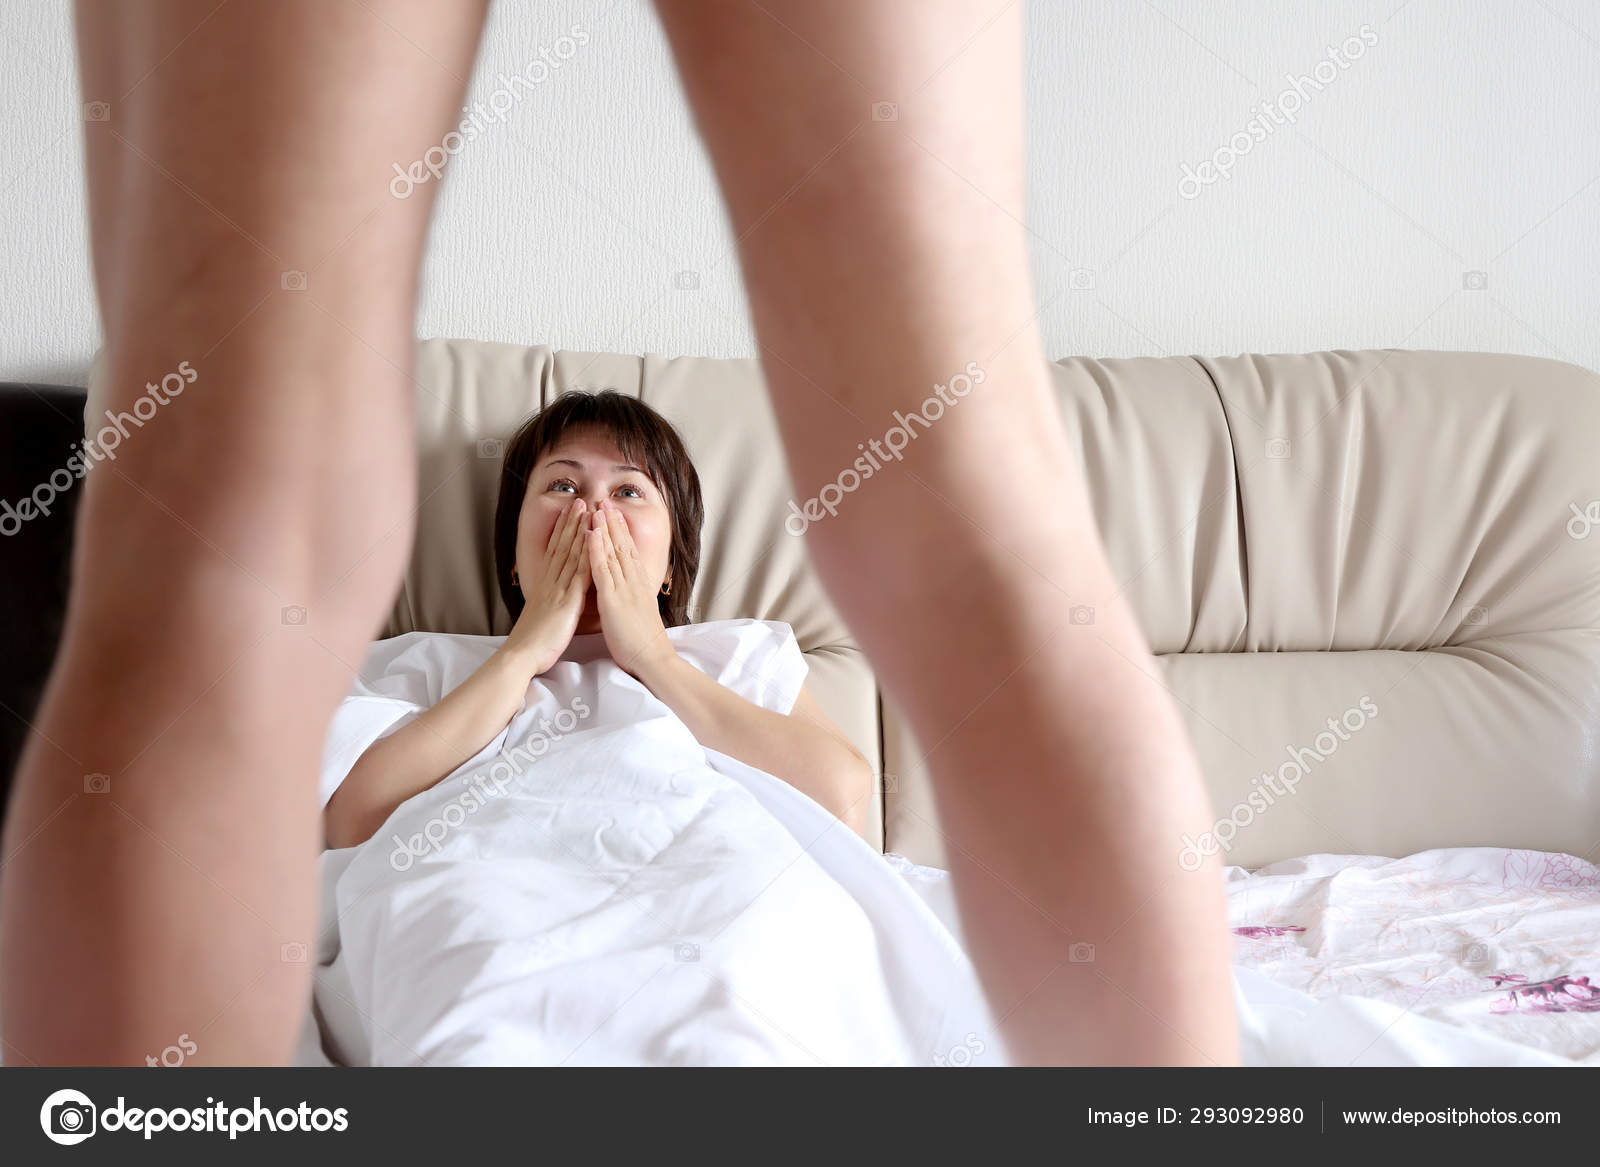 Couple Lovers Bed Woman Looking Naked Man Surprised Face Expression Stock Photo by ©olegpmr 293092980